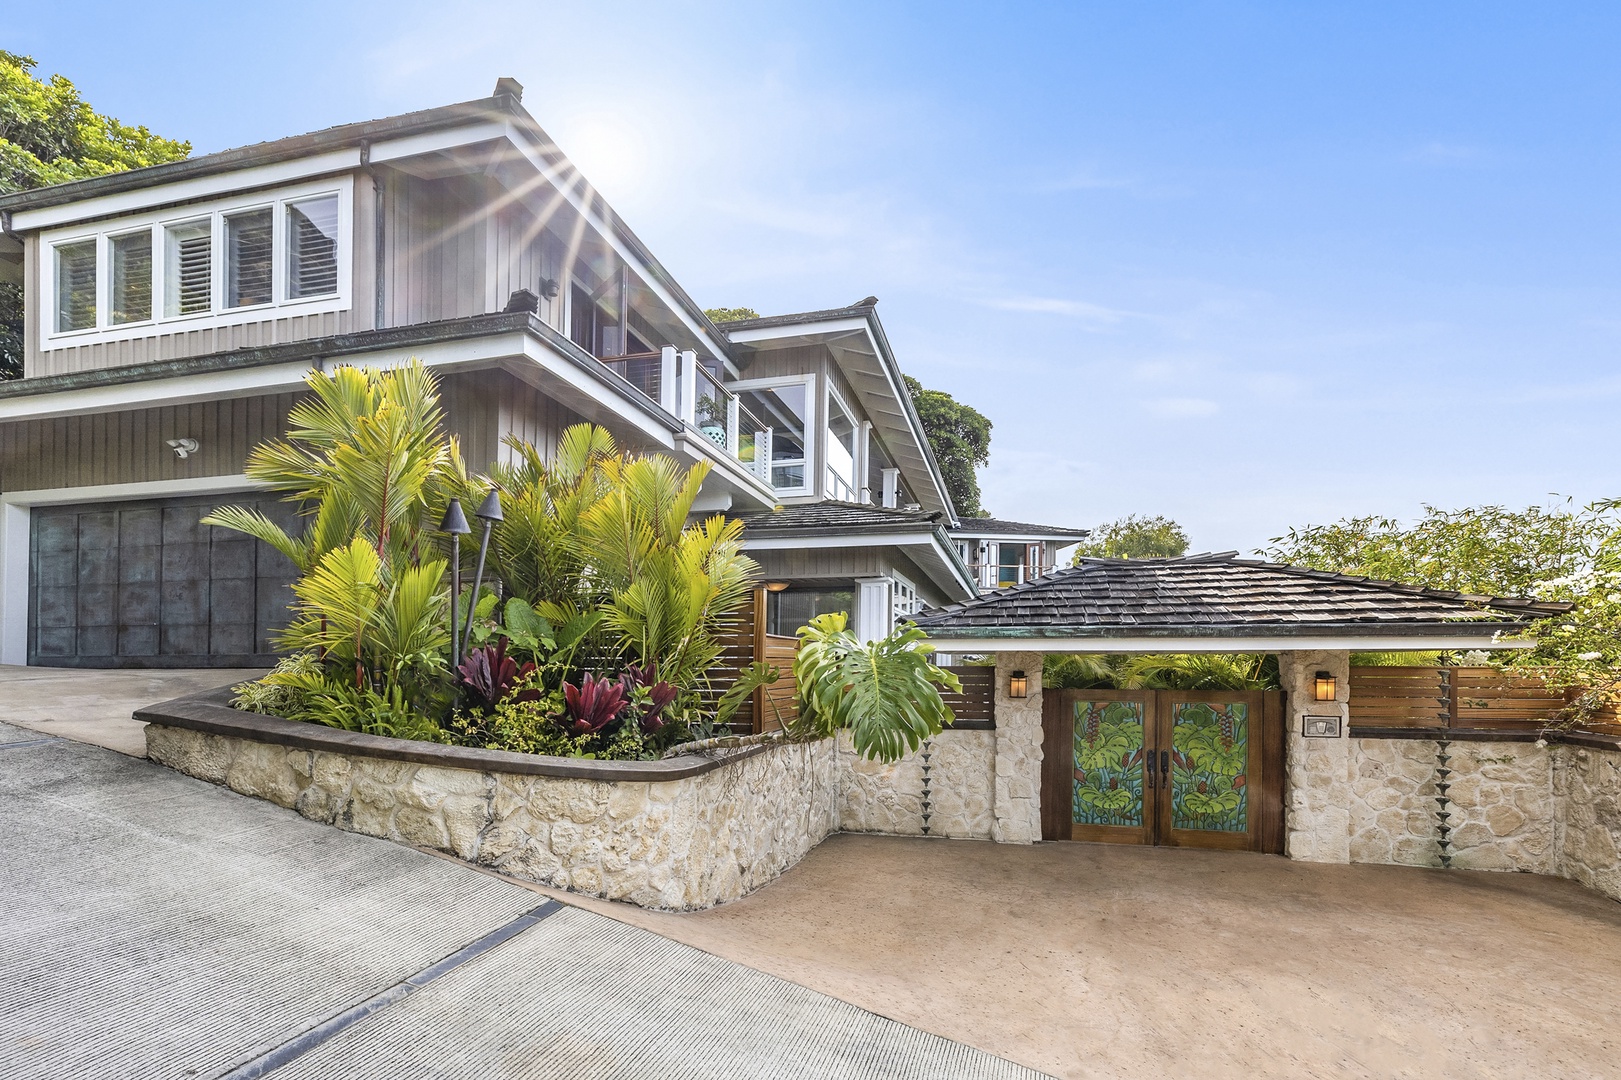 Kailua Vacation Rentals, Lanikai Villa - Arrive at your villa and use the private entrance to start your vacation of a lifetime!